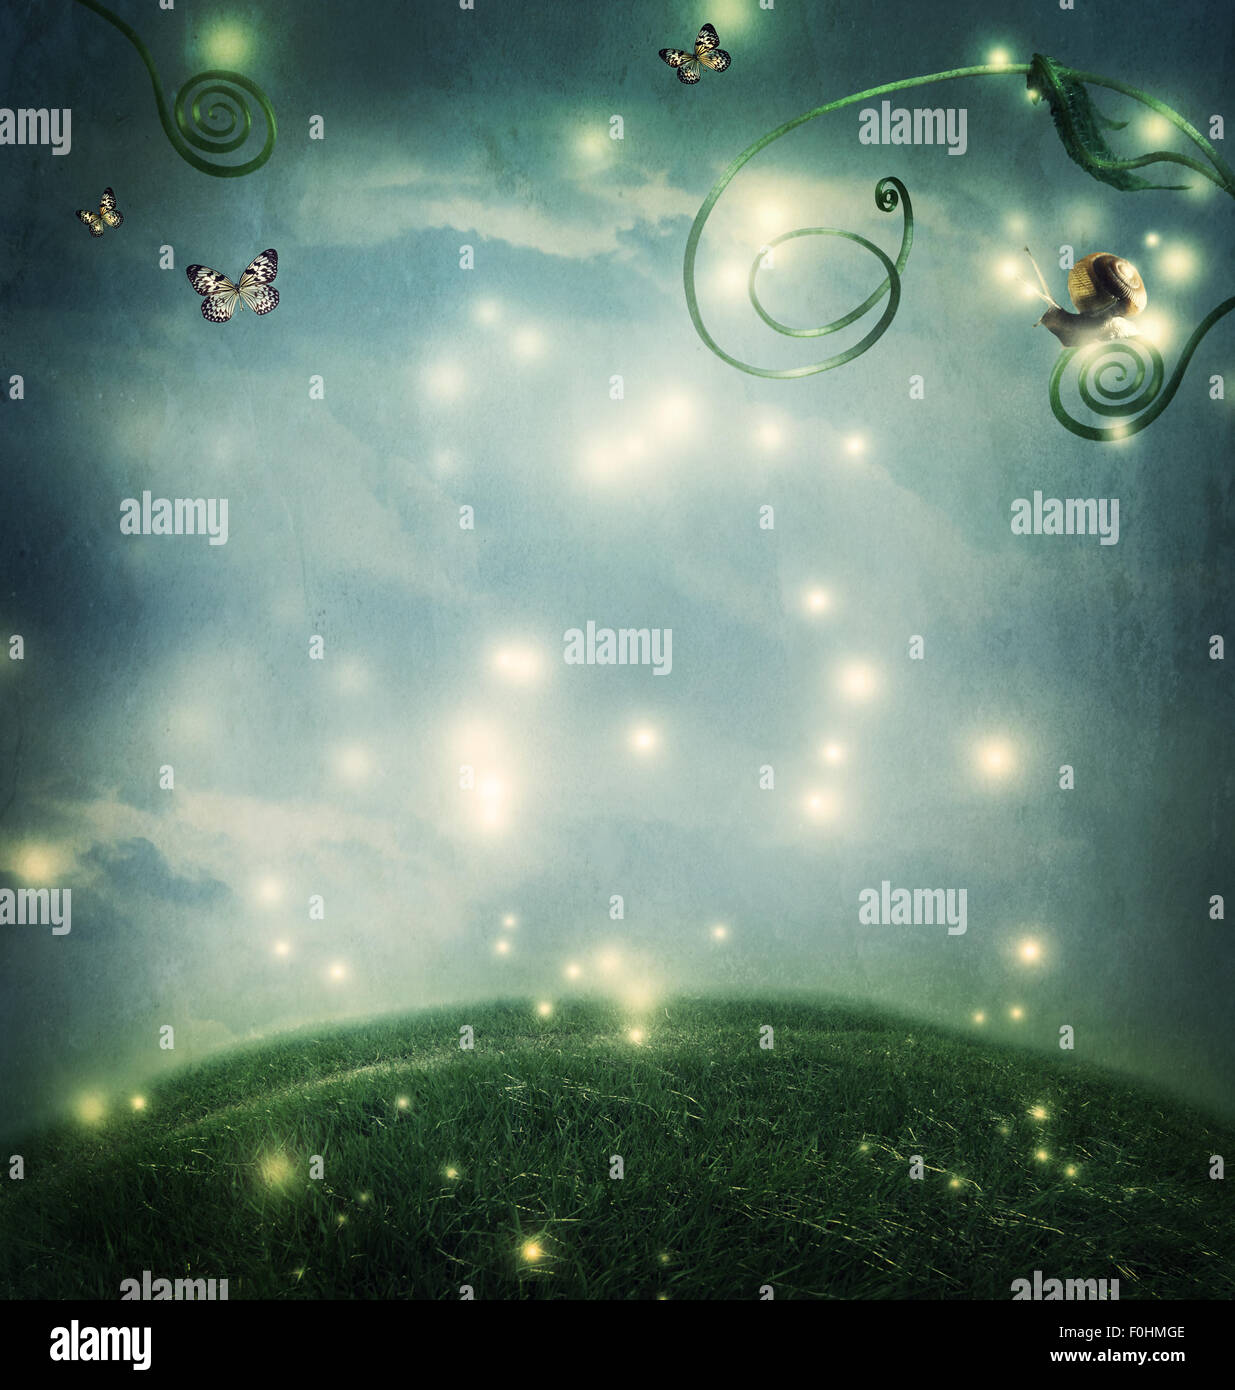 Fantasy night landscape with a small snail, butterflies and tendrils Stock Photo